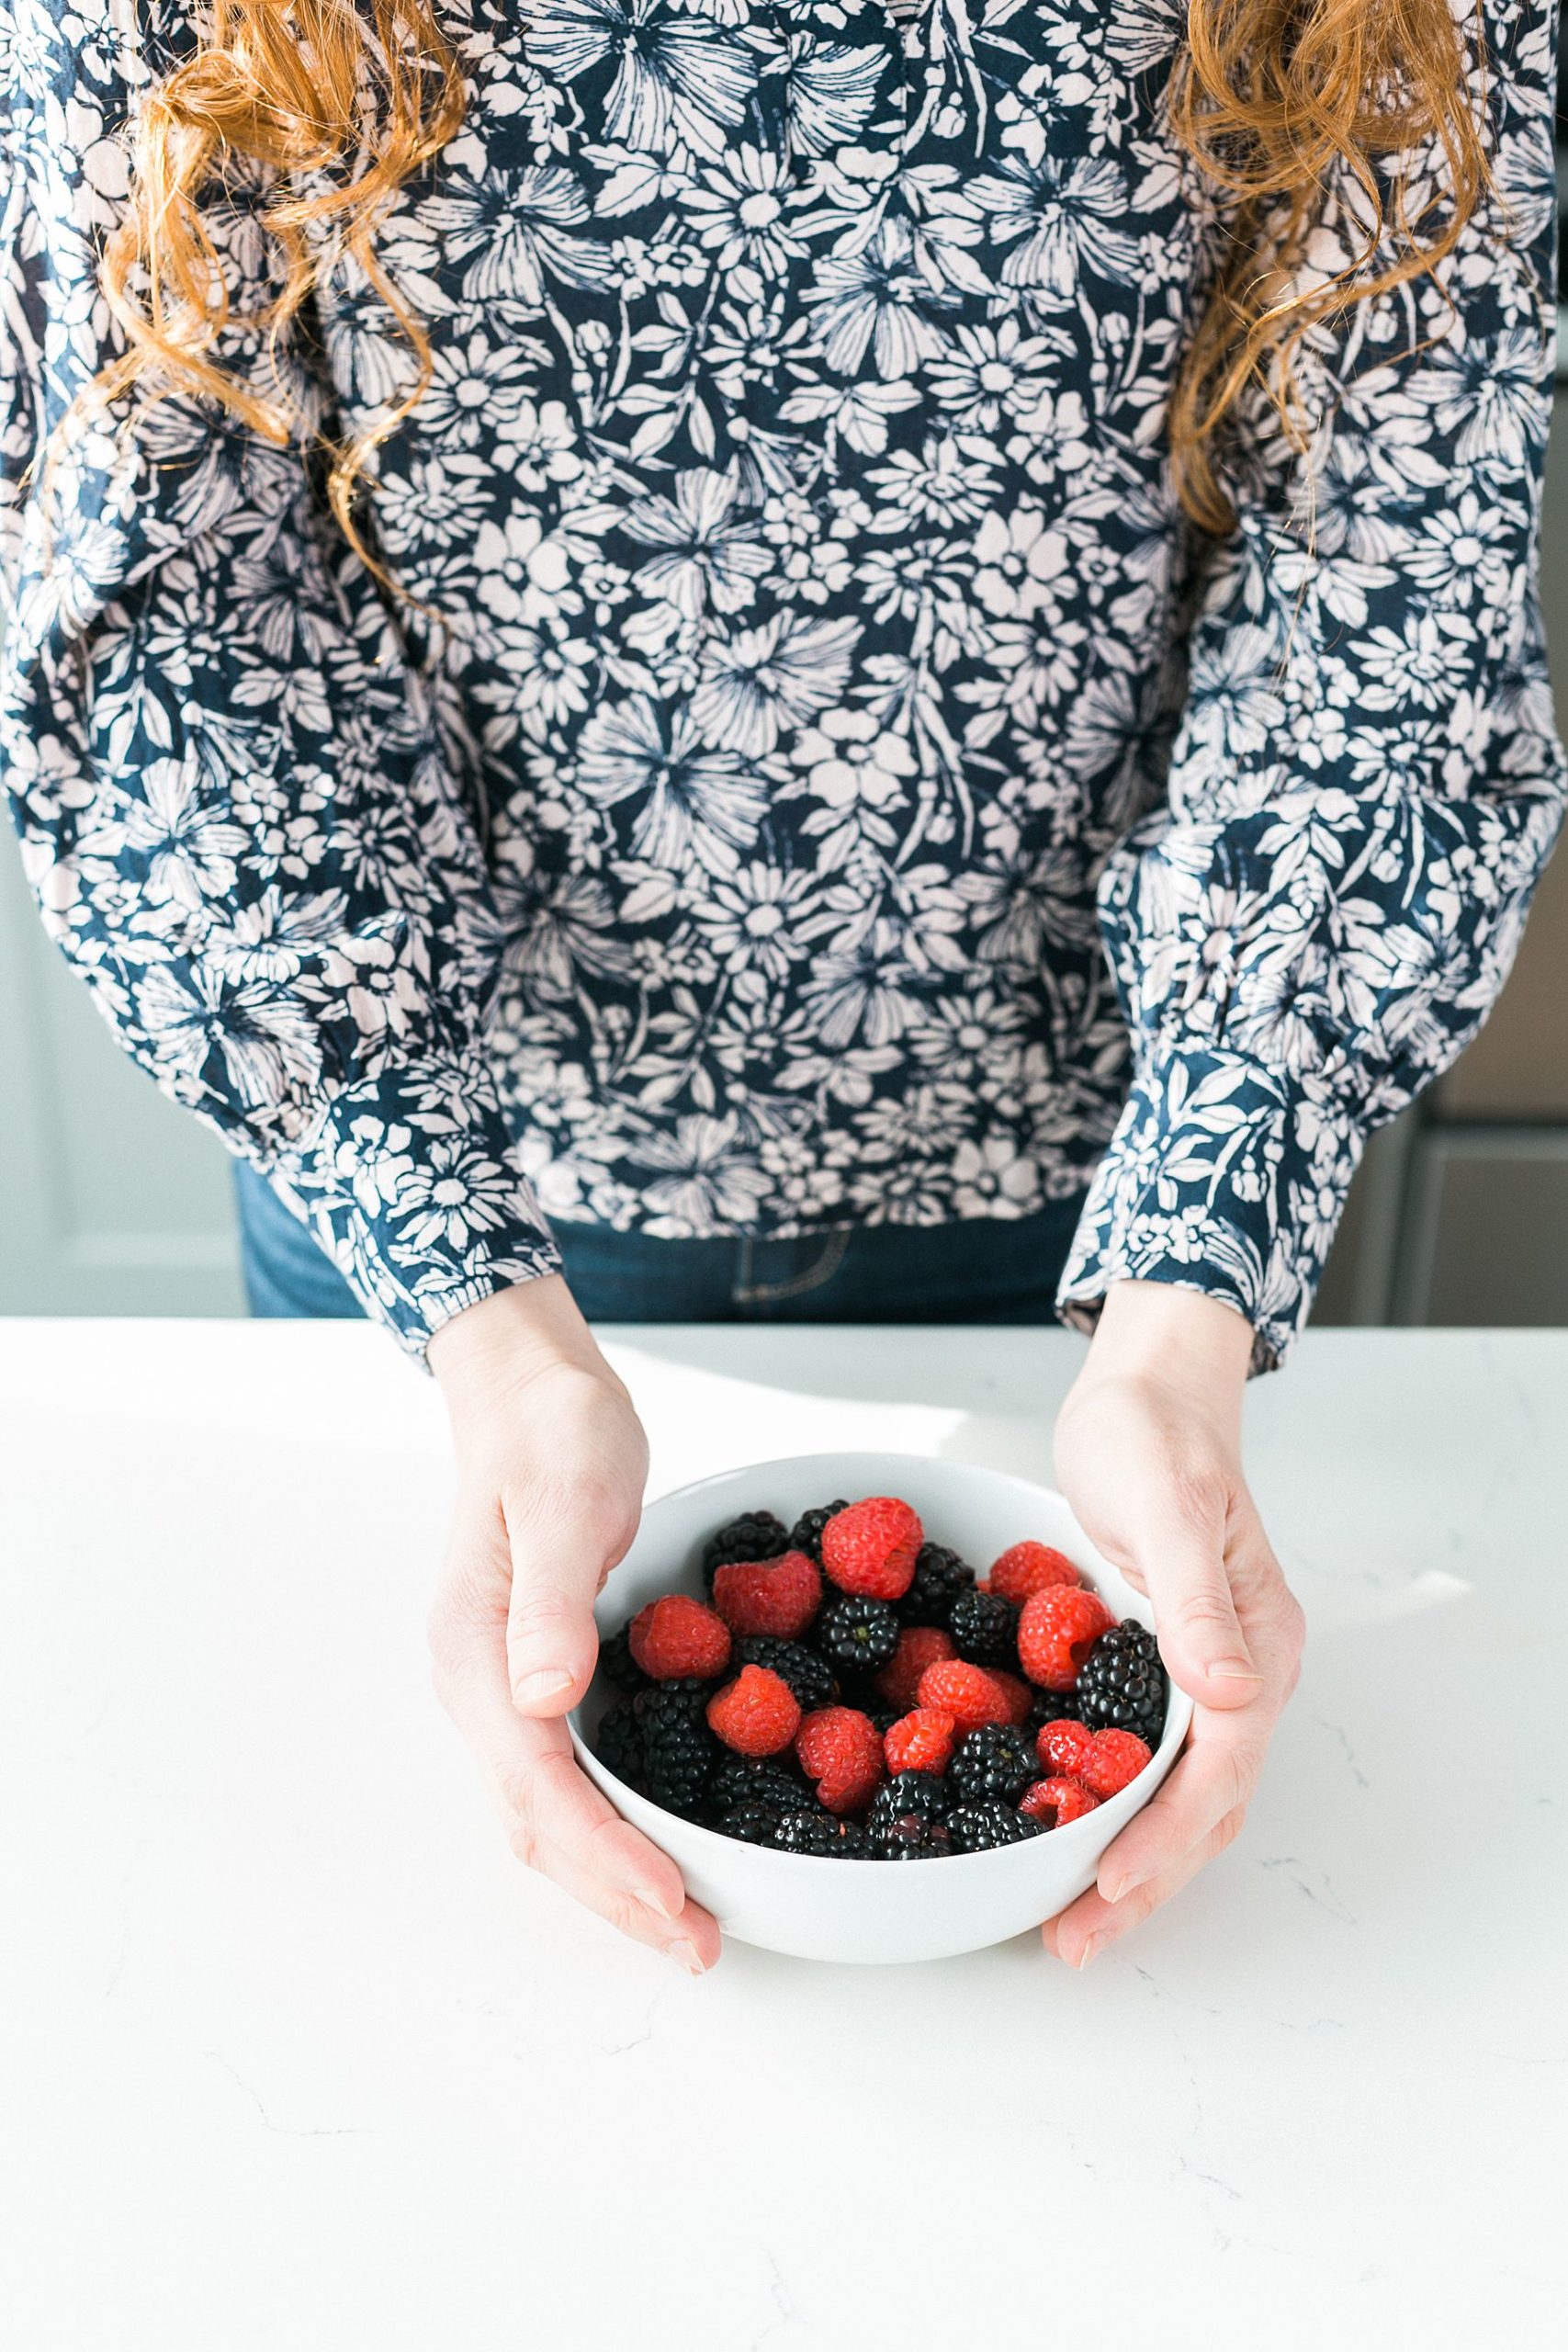 wellness coach holding a bowl of berries